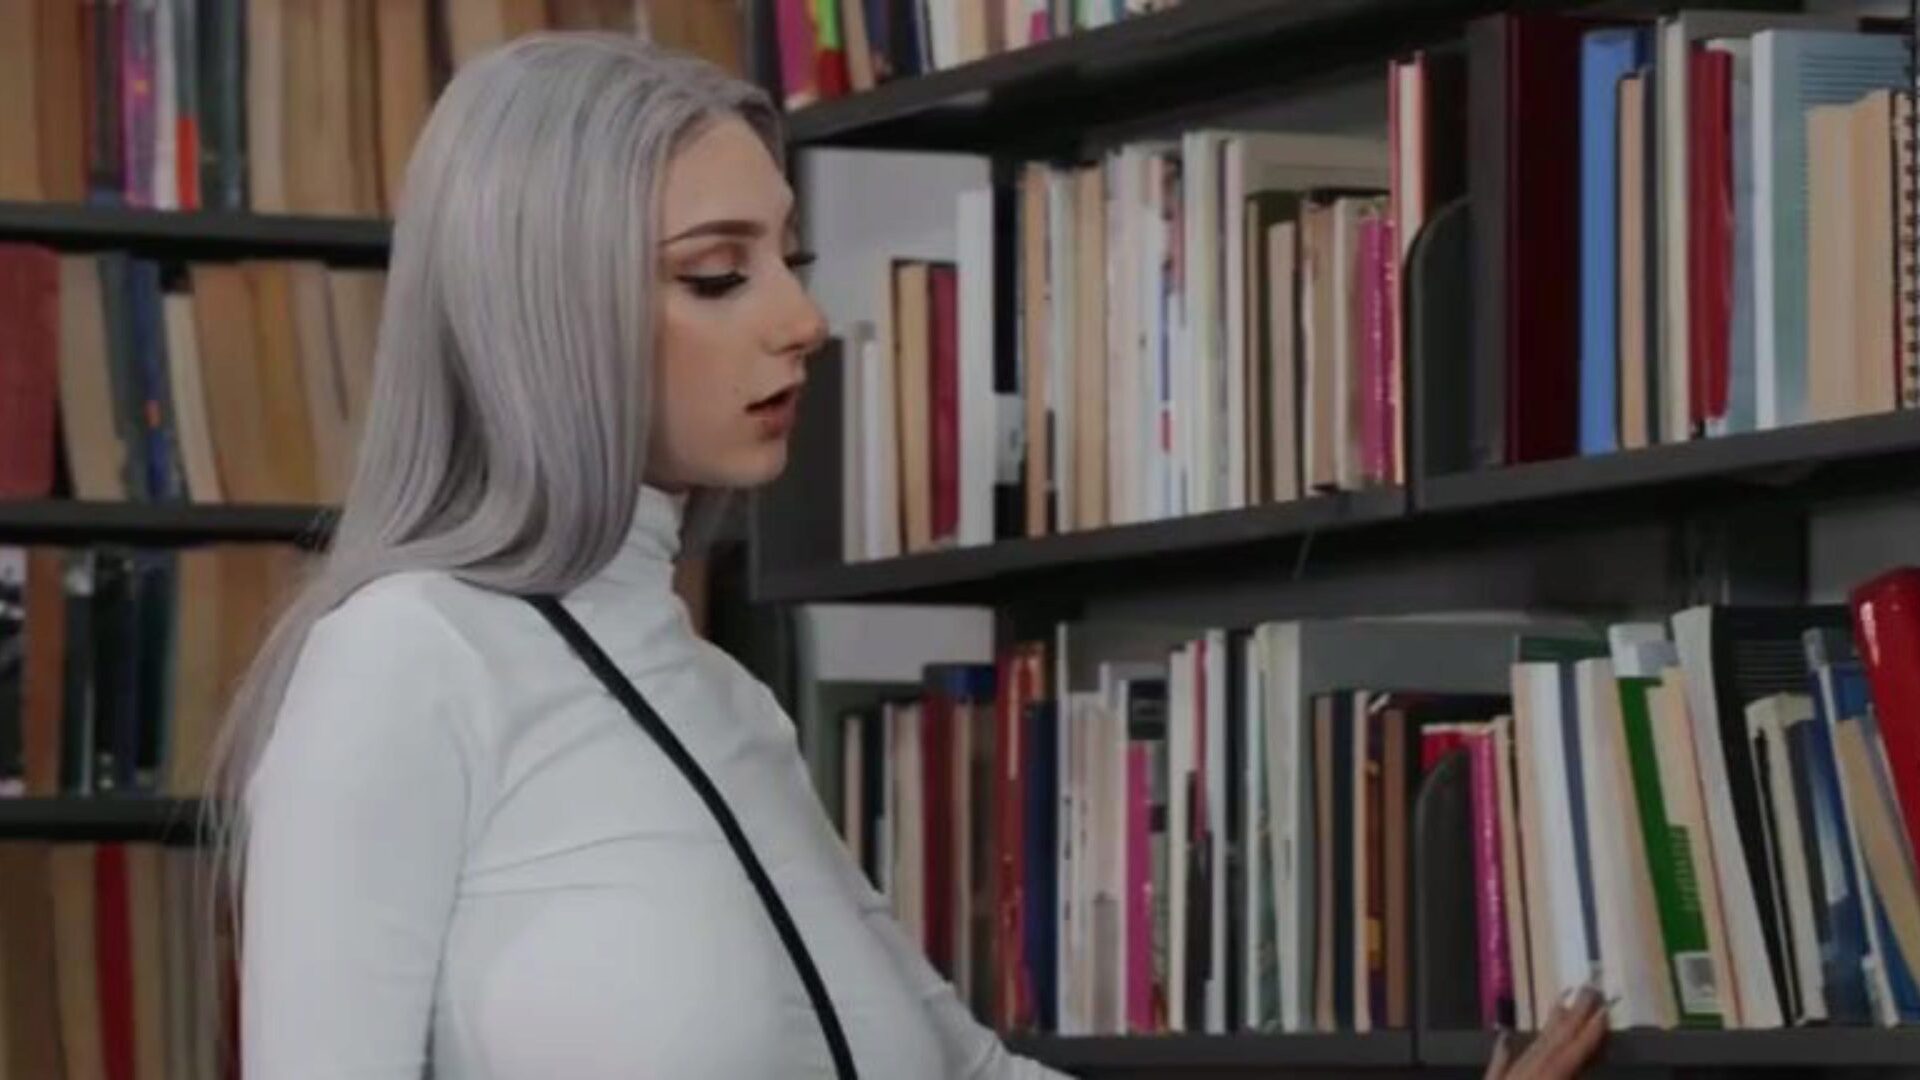 Biggest Naturals on White Haired Nerd Library Fanatic As we all know everybody who displays up at a library is a Fanatic and a Total Nerd, which is why it was kinda surprising to see this sweetheart go full-on floozy during the time that there!